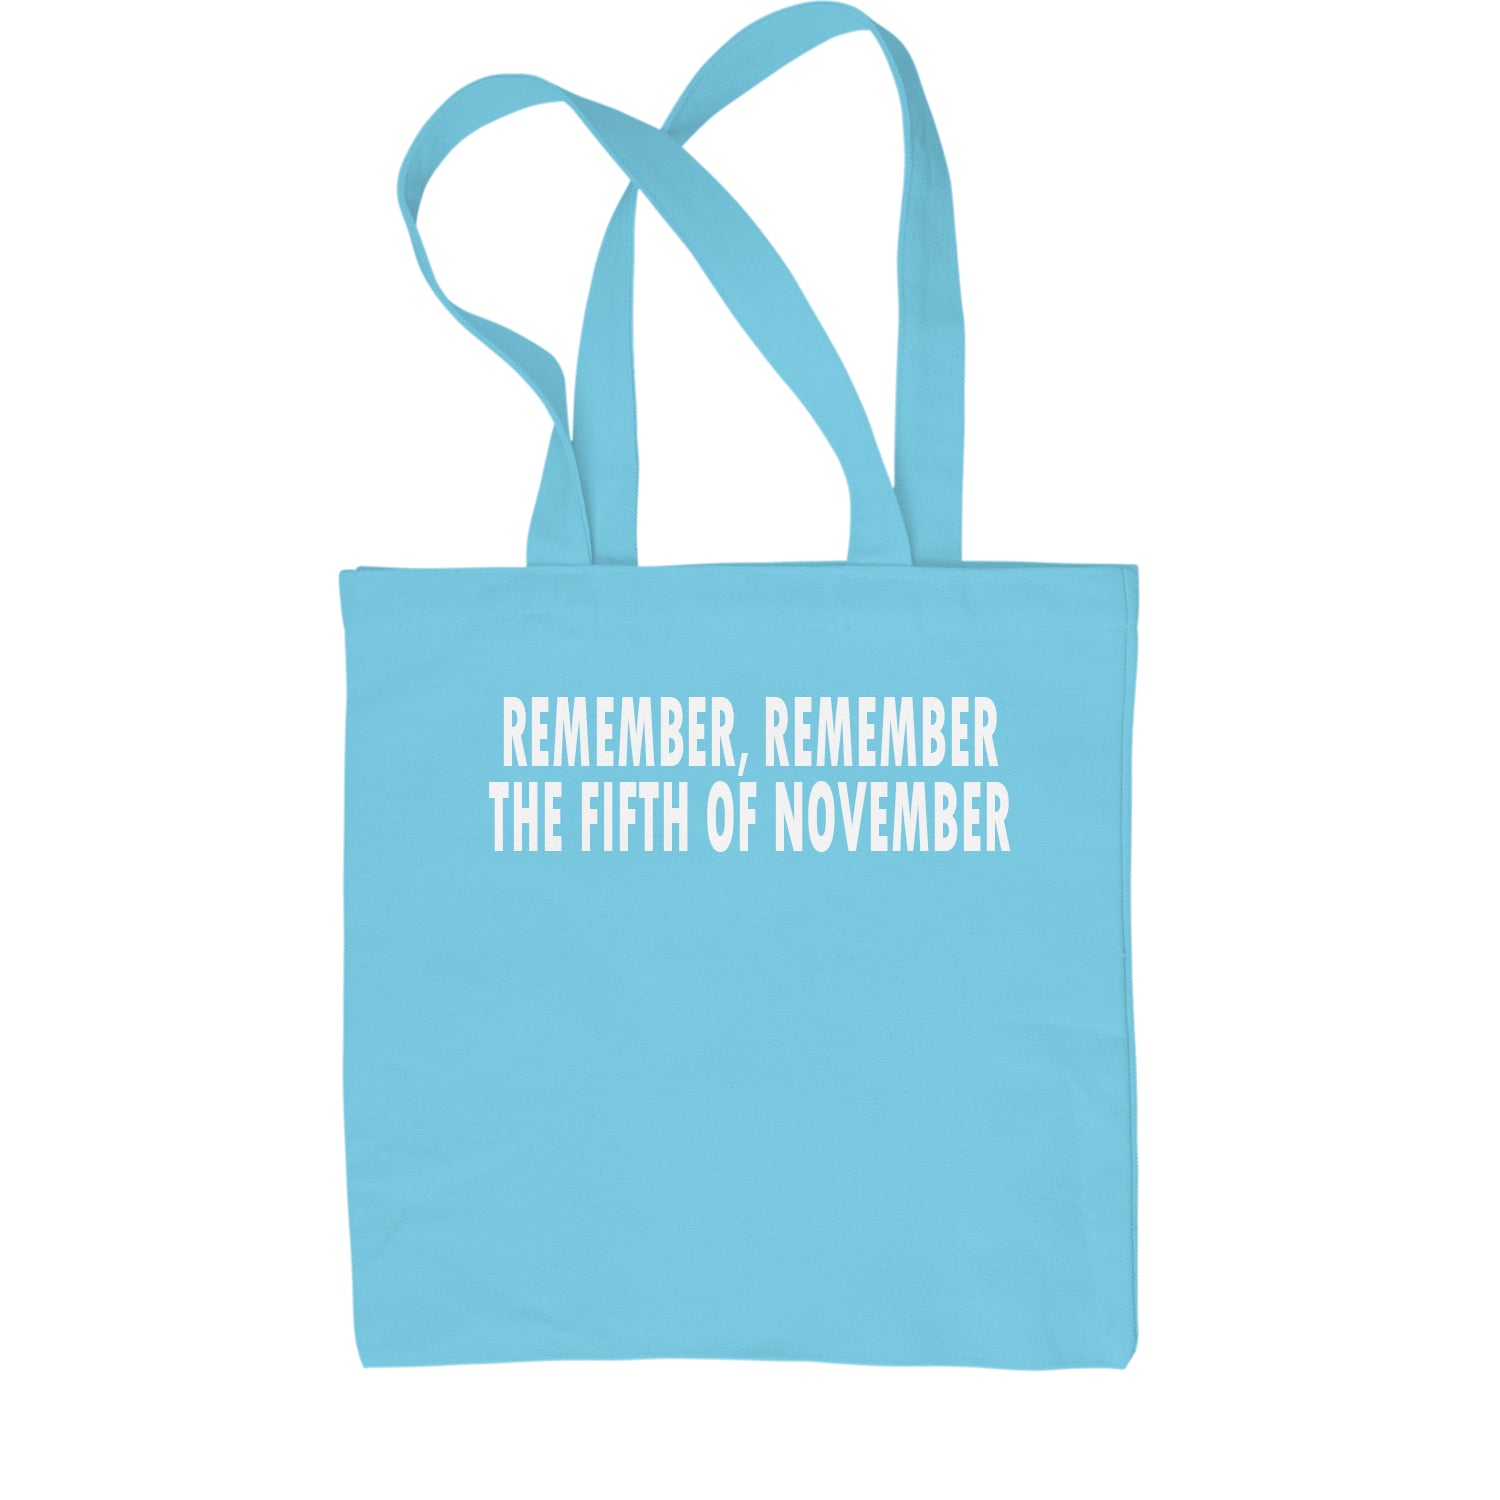 Remember The Fifth Of November Shopping Tote Bag for, v, vendetta, vforvendetta by Expression Tees